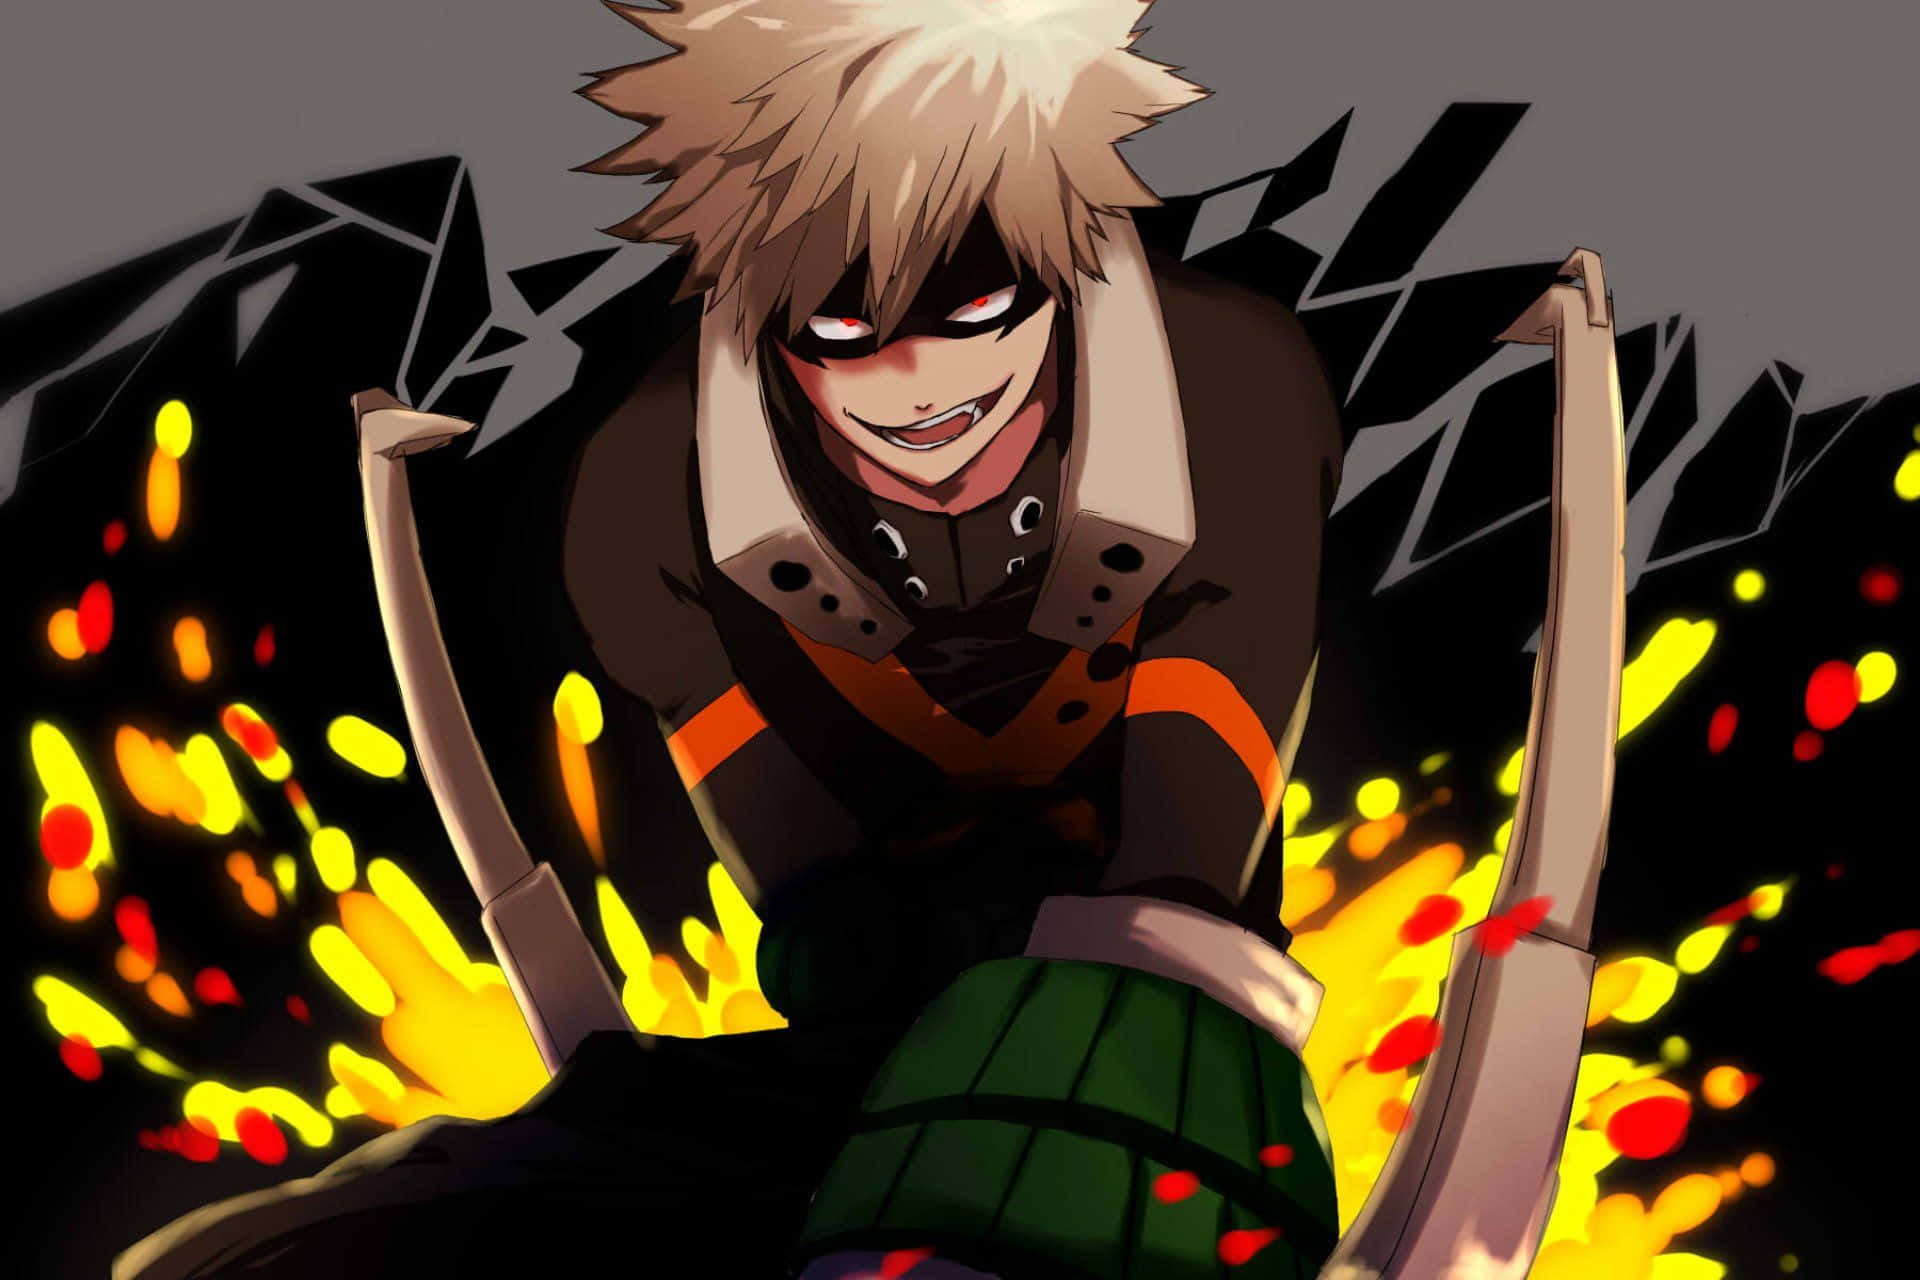 Explosive and Powerful - Bakugo in Action